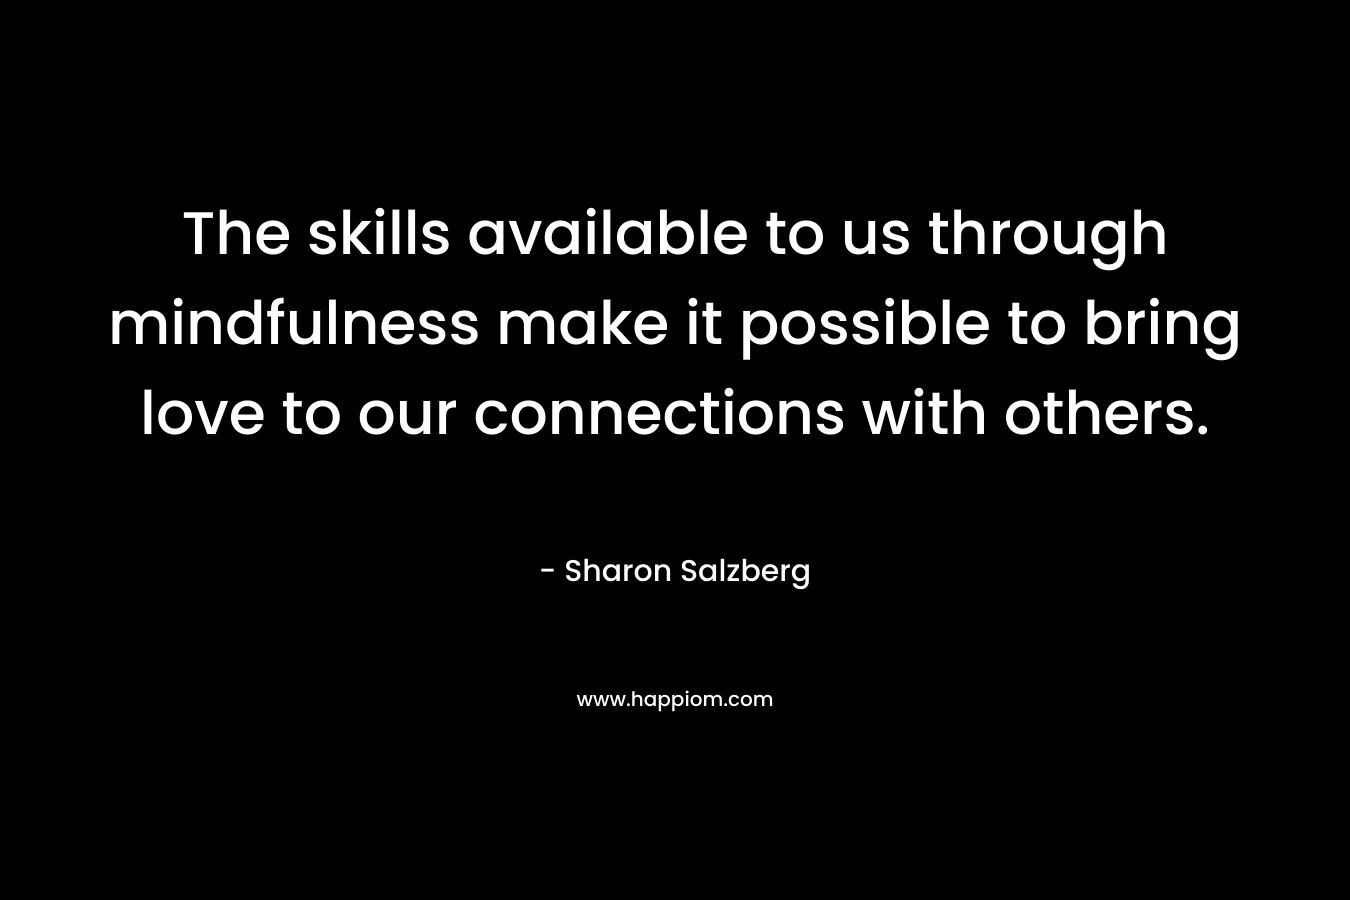 The skills available to us through mindfulness make it possible to bring love to our connections with others.